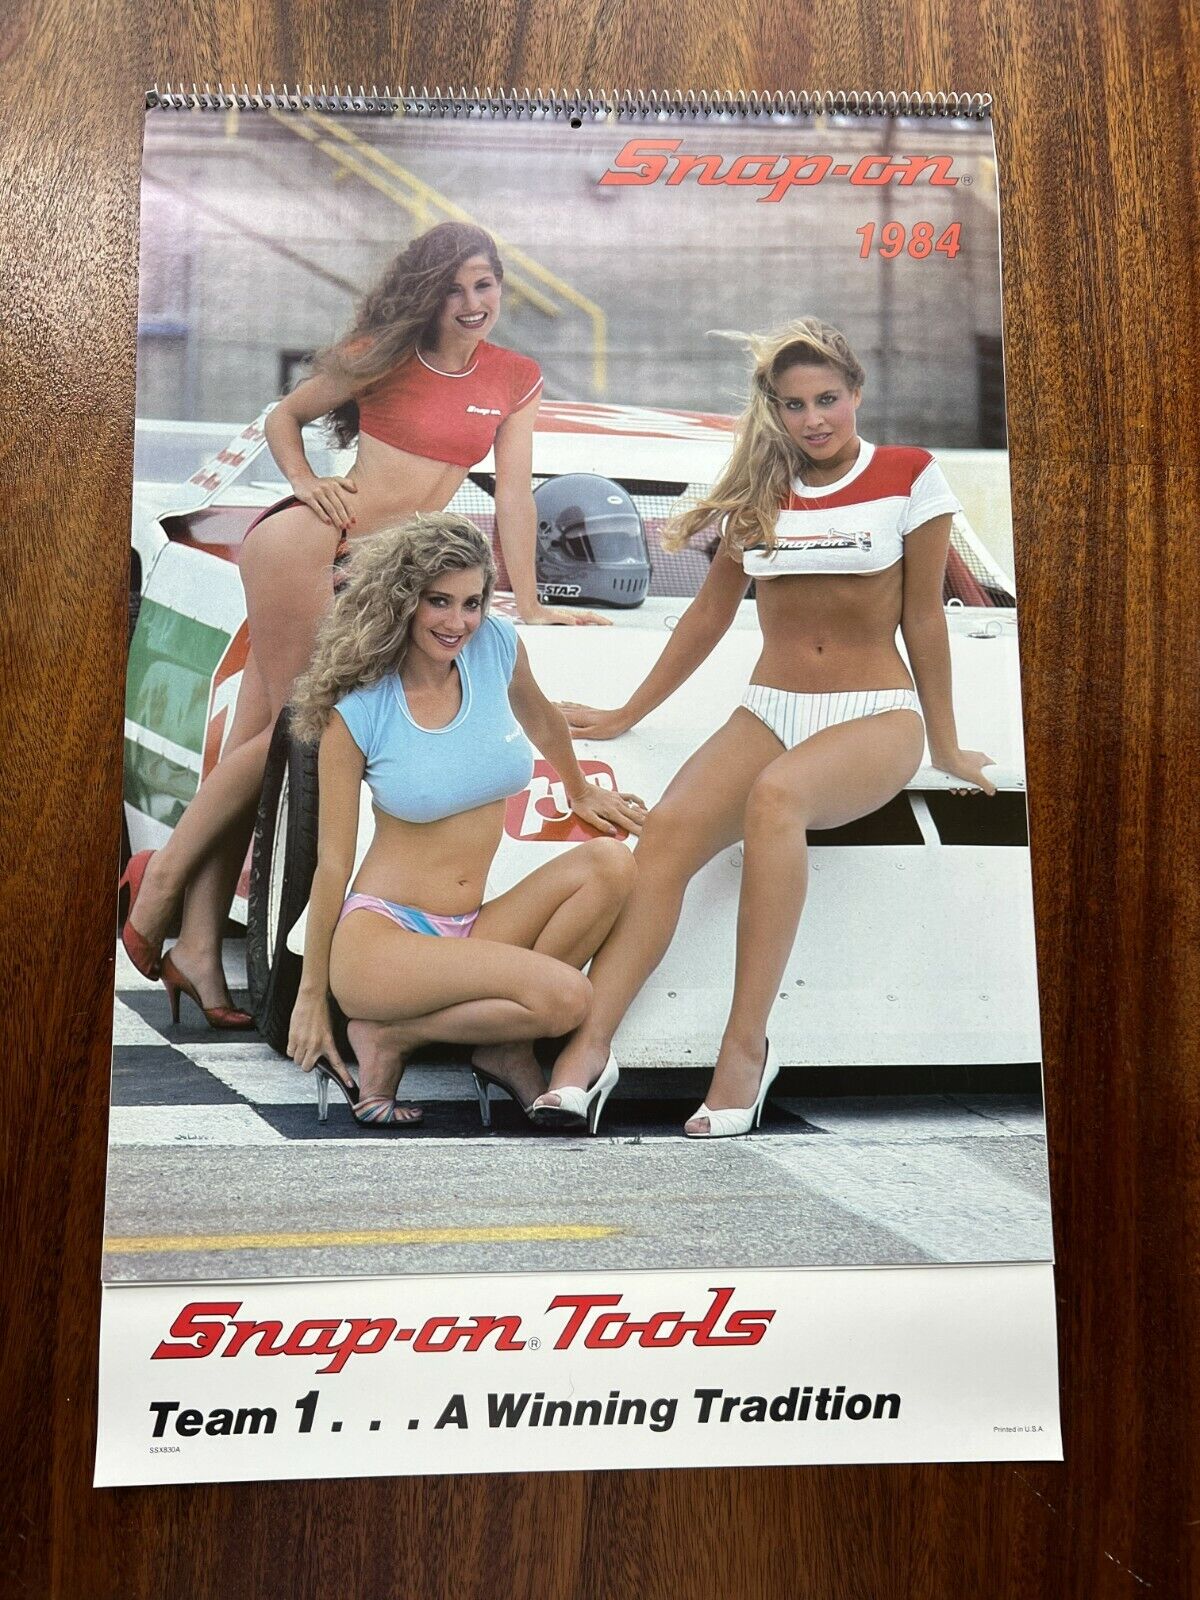 Rare Vintage 1984 SNAP-ON TOOLS Collectors Edition Pinup Girl Swimsuit Calendar 